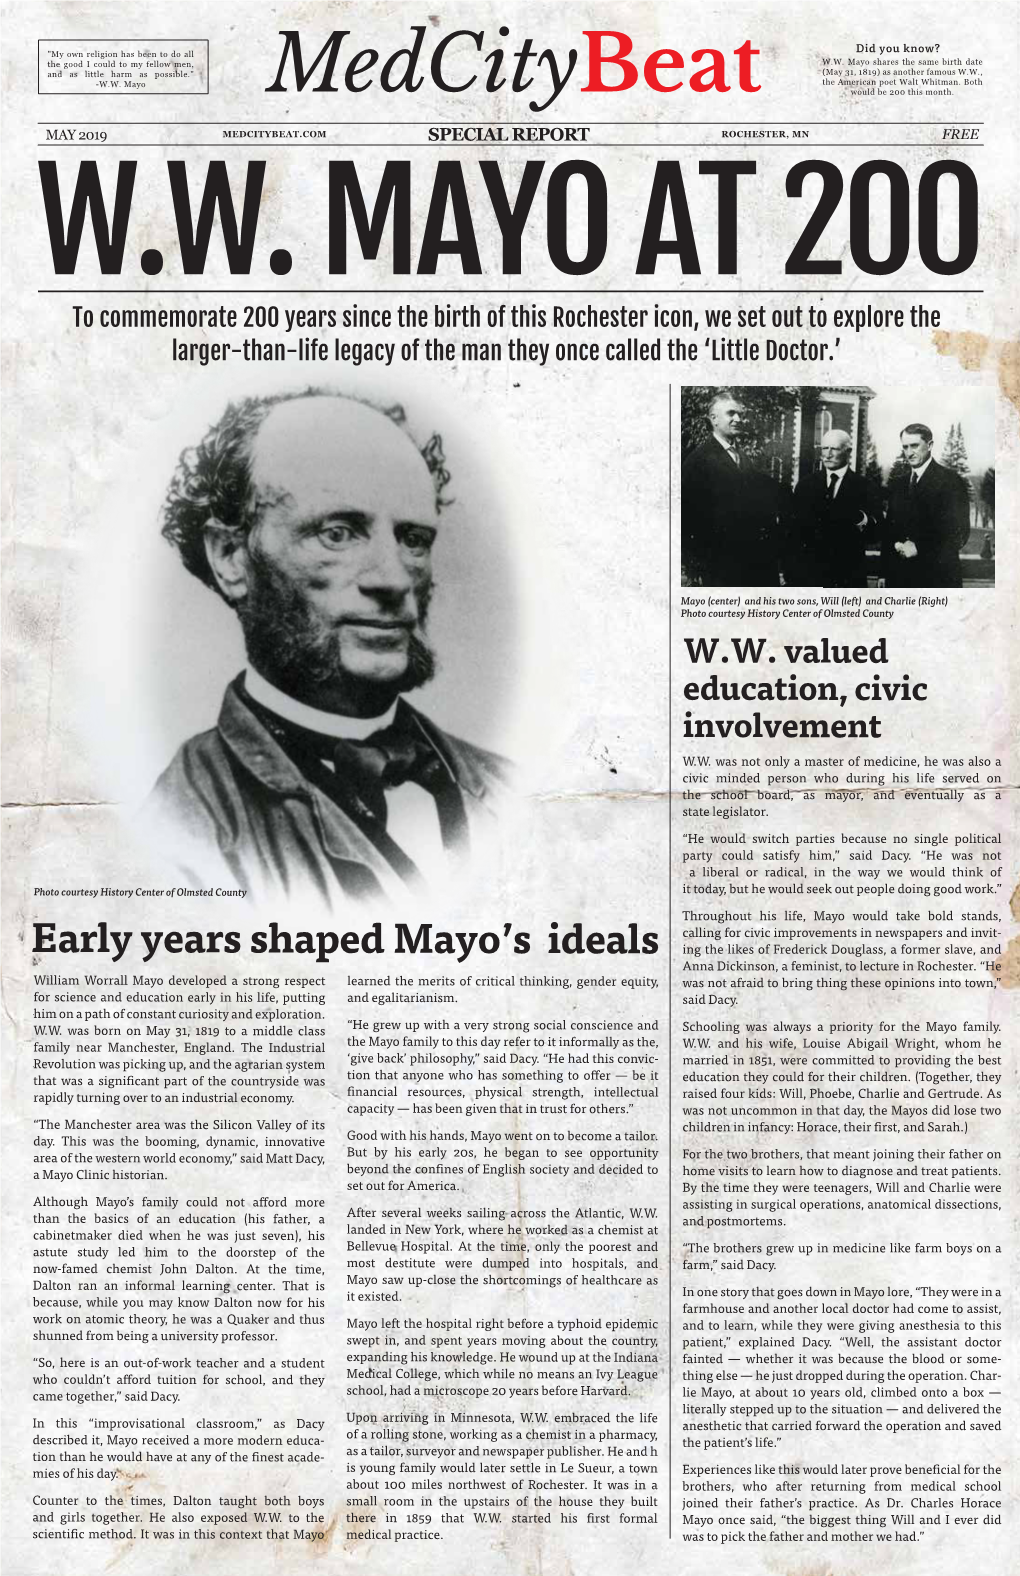 Early Years Shaped Mayo's Ideals